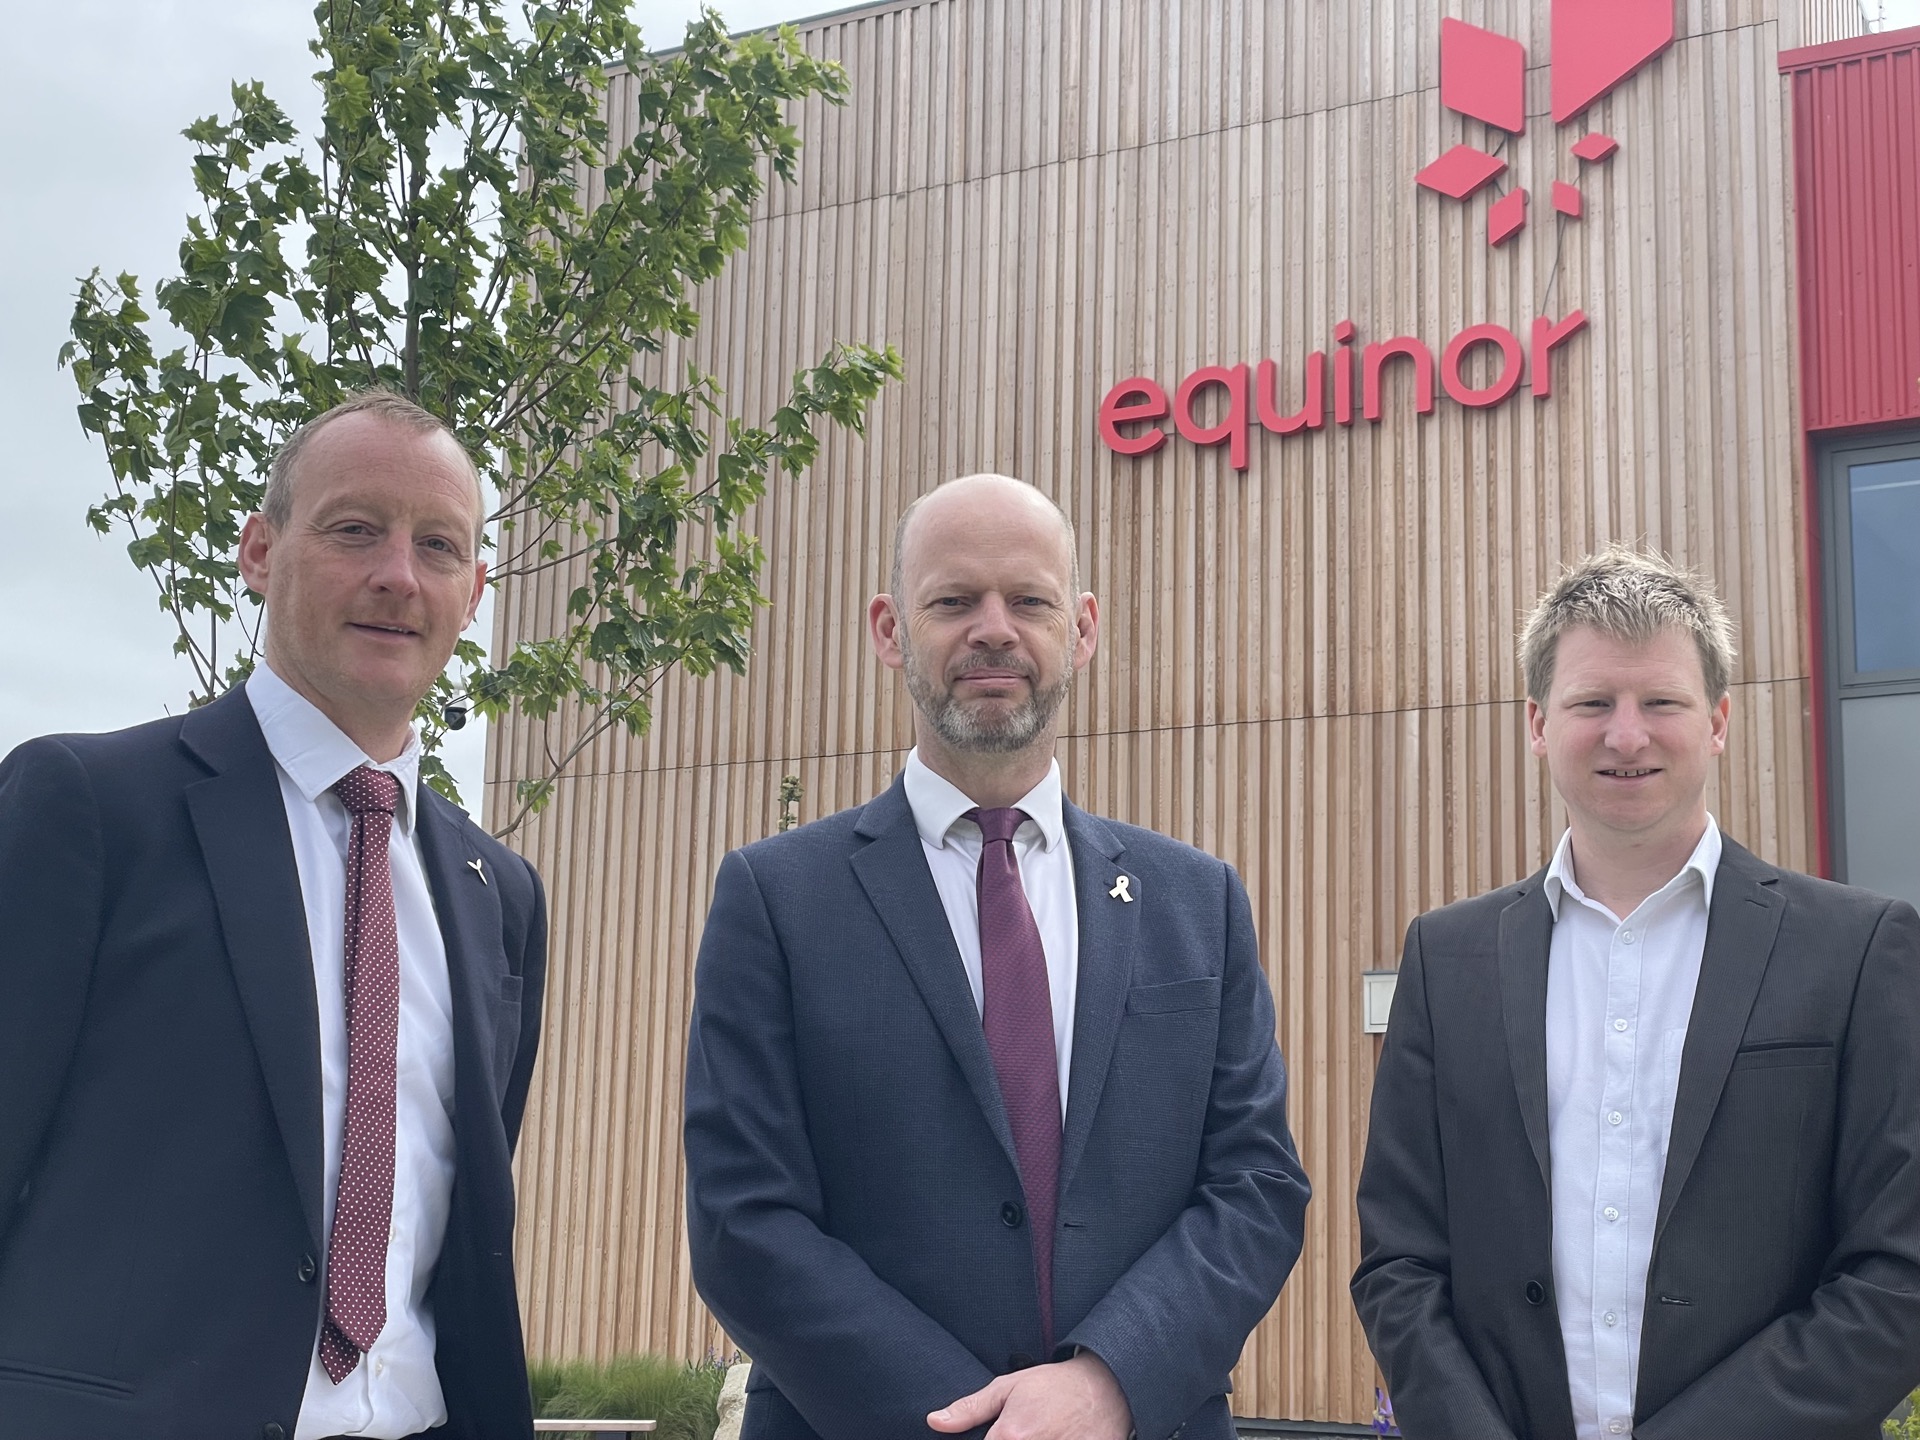 North East cleantech scale-up Kinewell Energy has signed a multi-year global contract with Equinor for the use of its pioneering KLOC software.